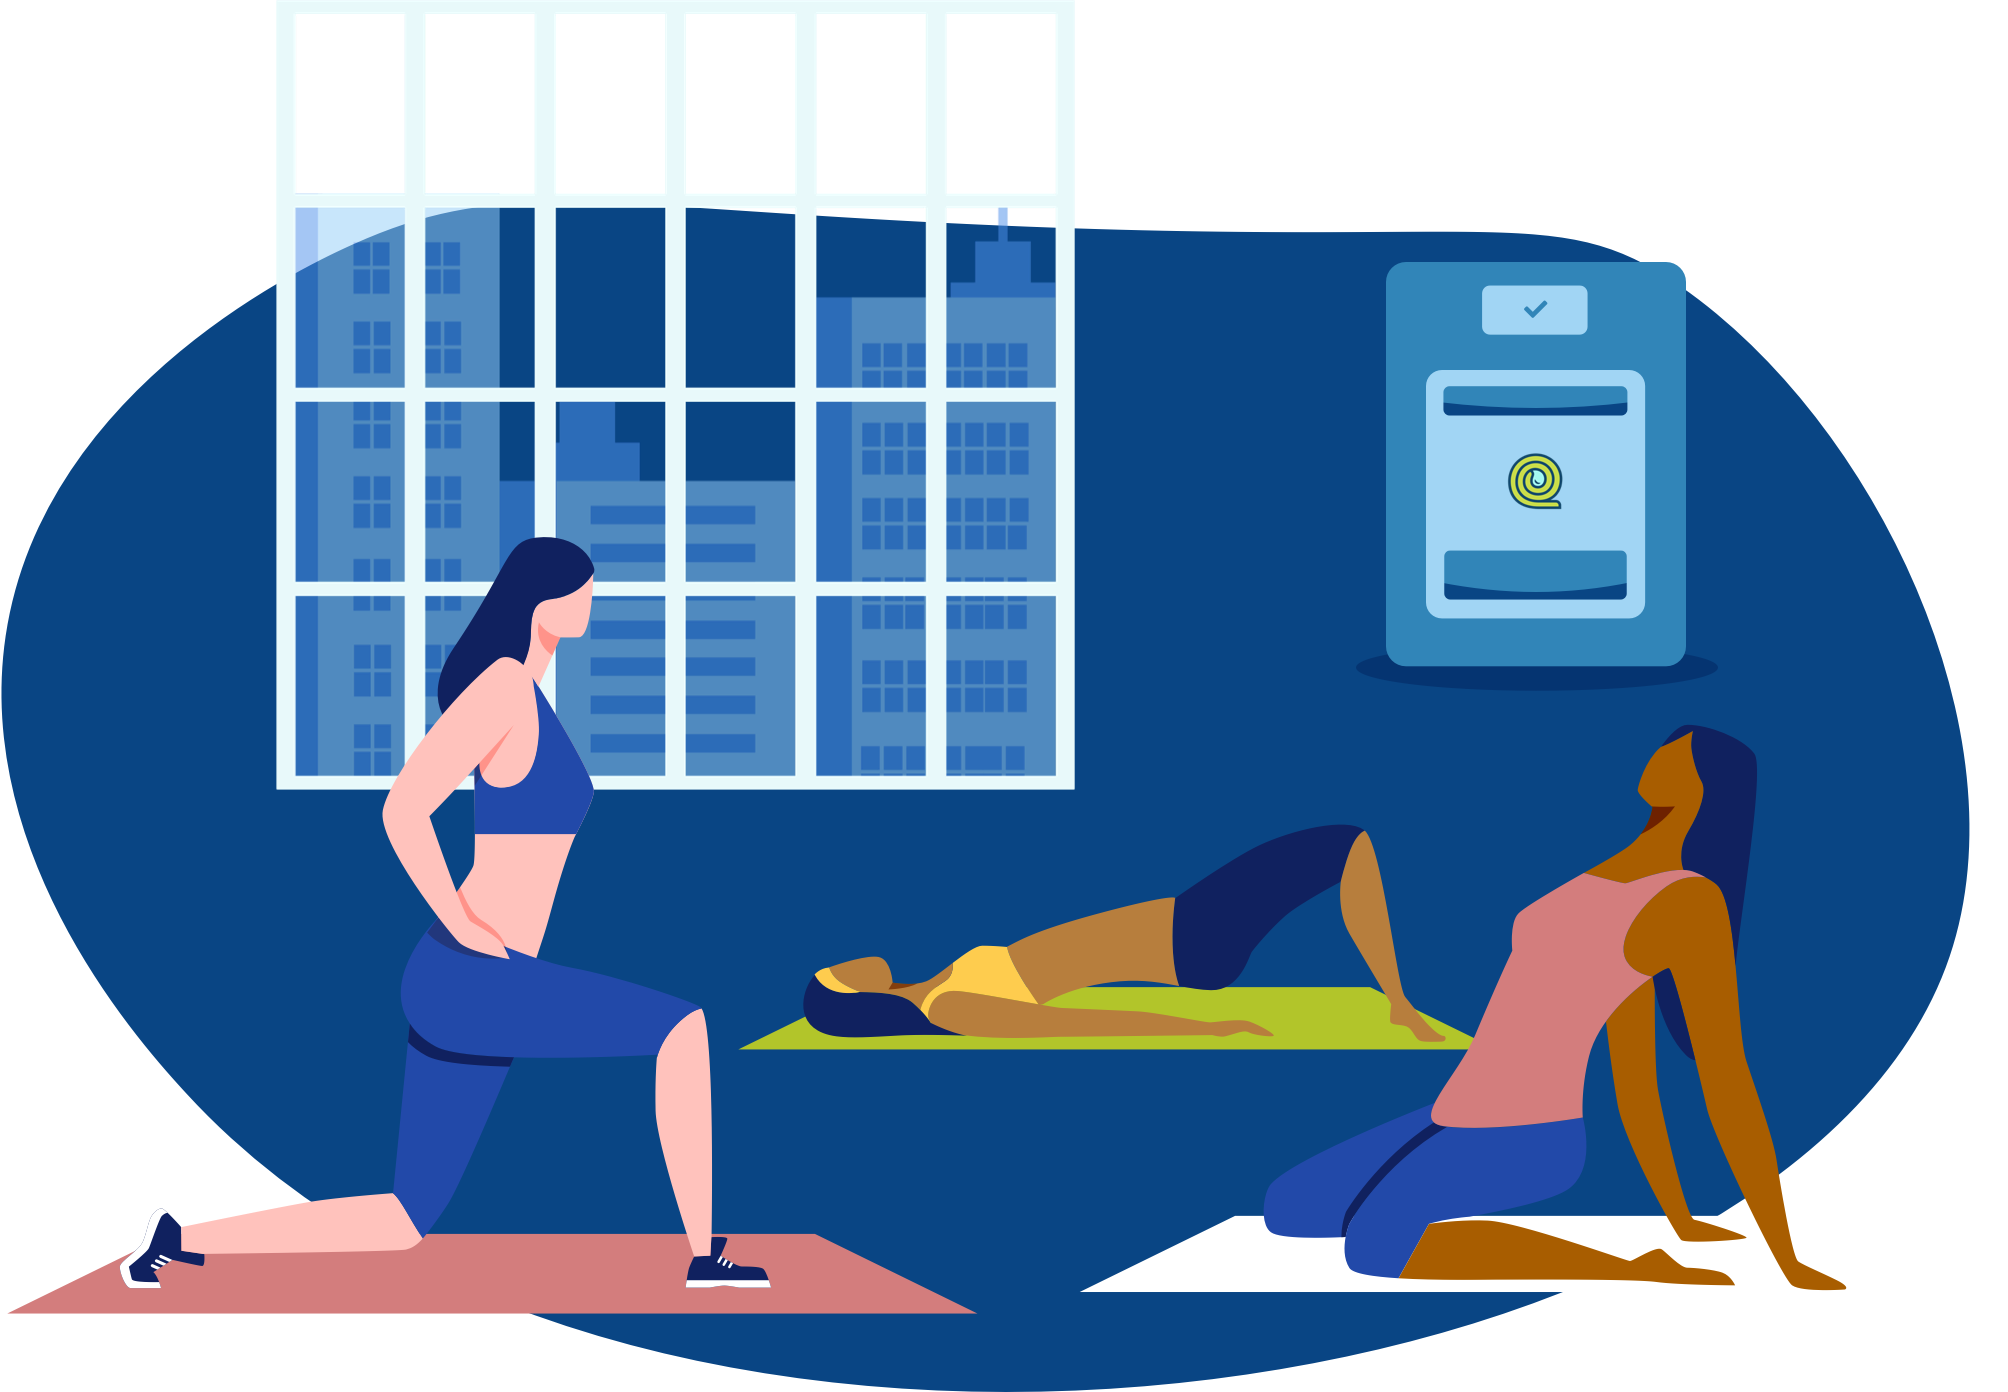 Three women in various poses on clean exercise mats within a MatFresher fitness center.